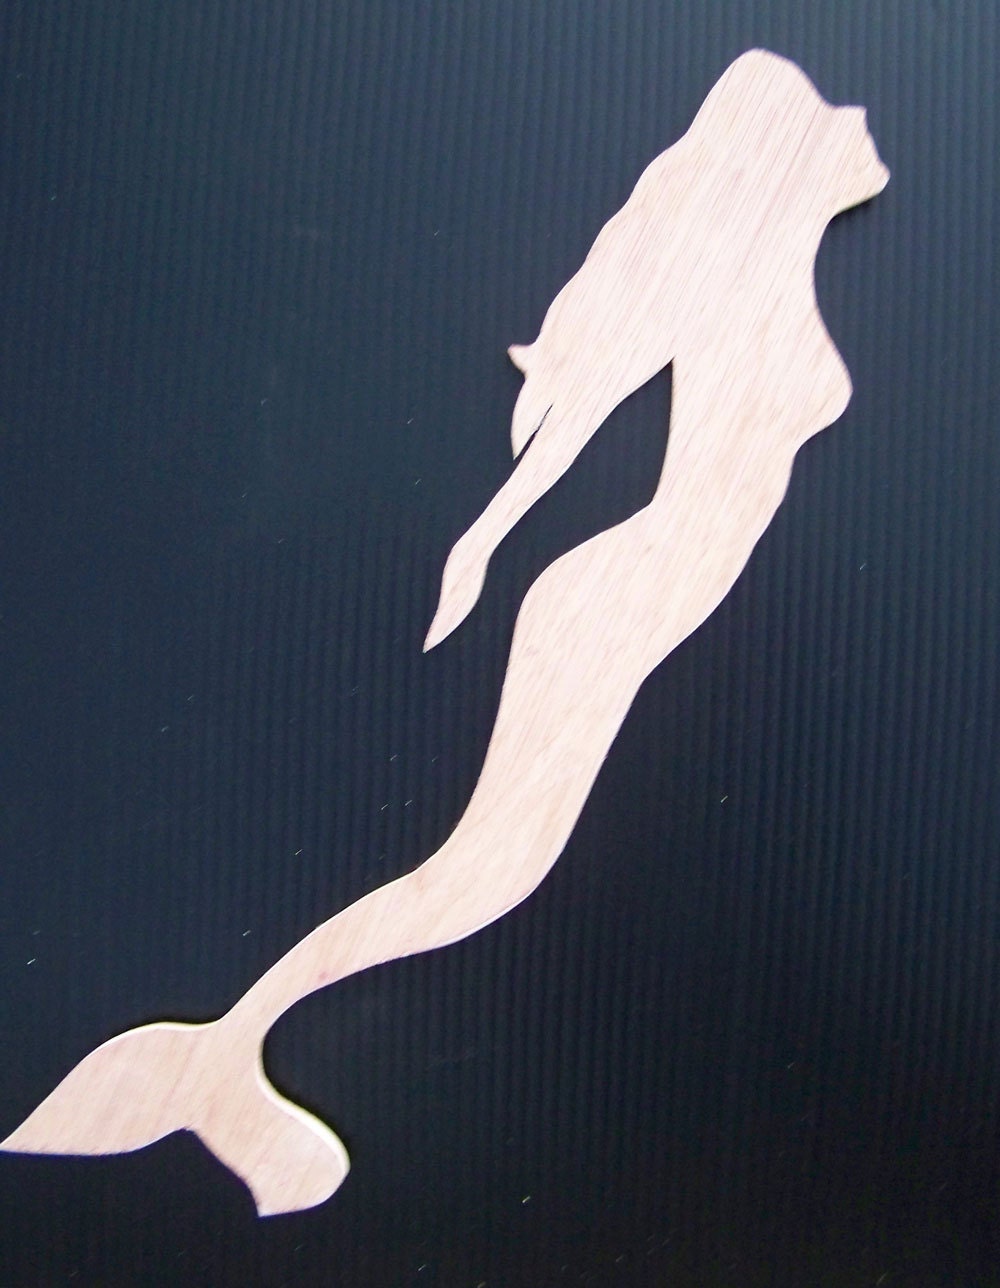 Mermaid Woodie Cut-out 17x4 by HeatherMBC on Etsy